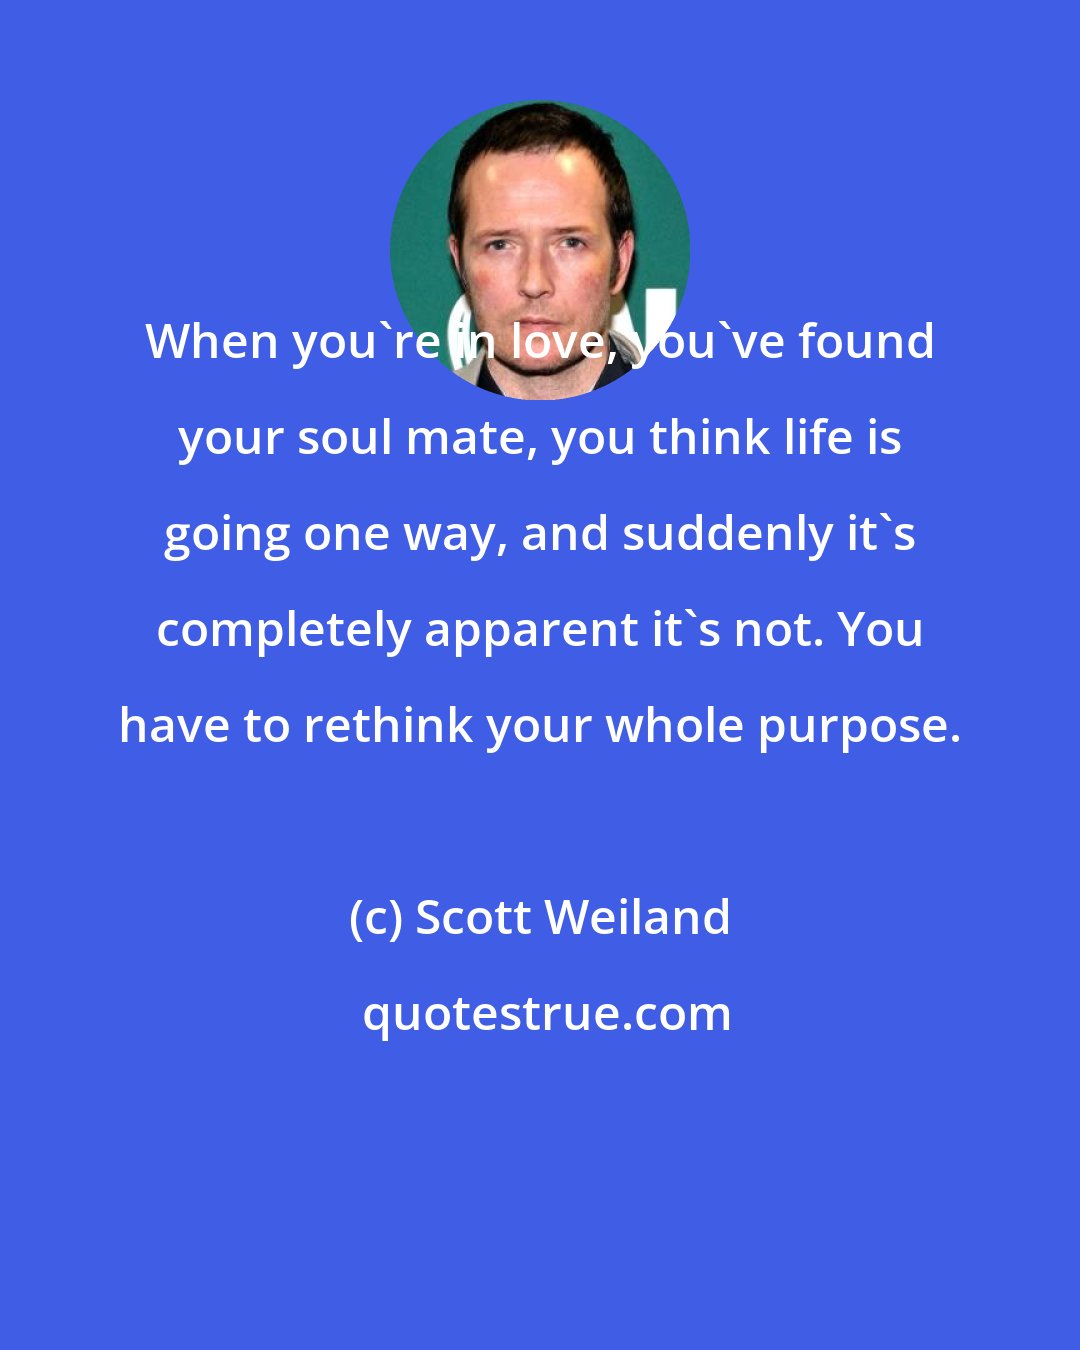 Scott Weiland: When you're in love, you've found your soul mate, you think life is going one way, and suddenly it's completely apparent it's not. You have to rethink your whole purpose.